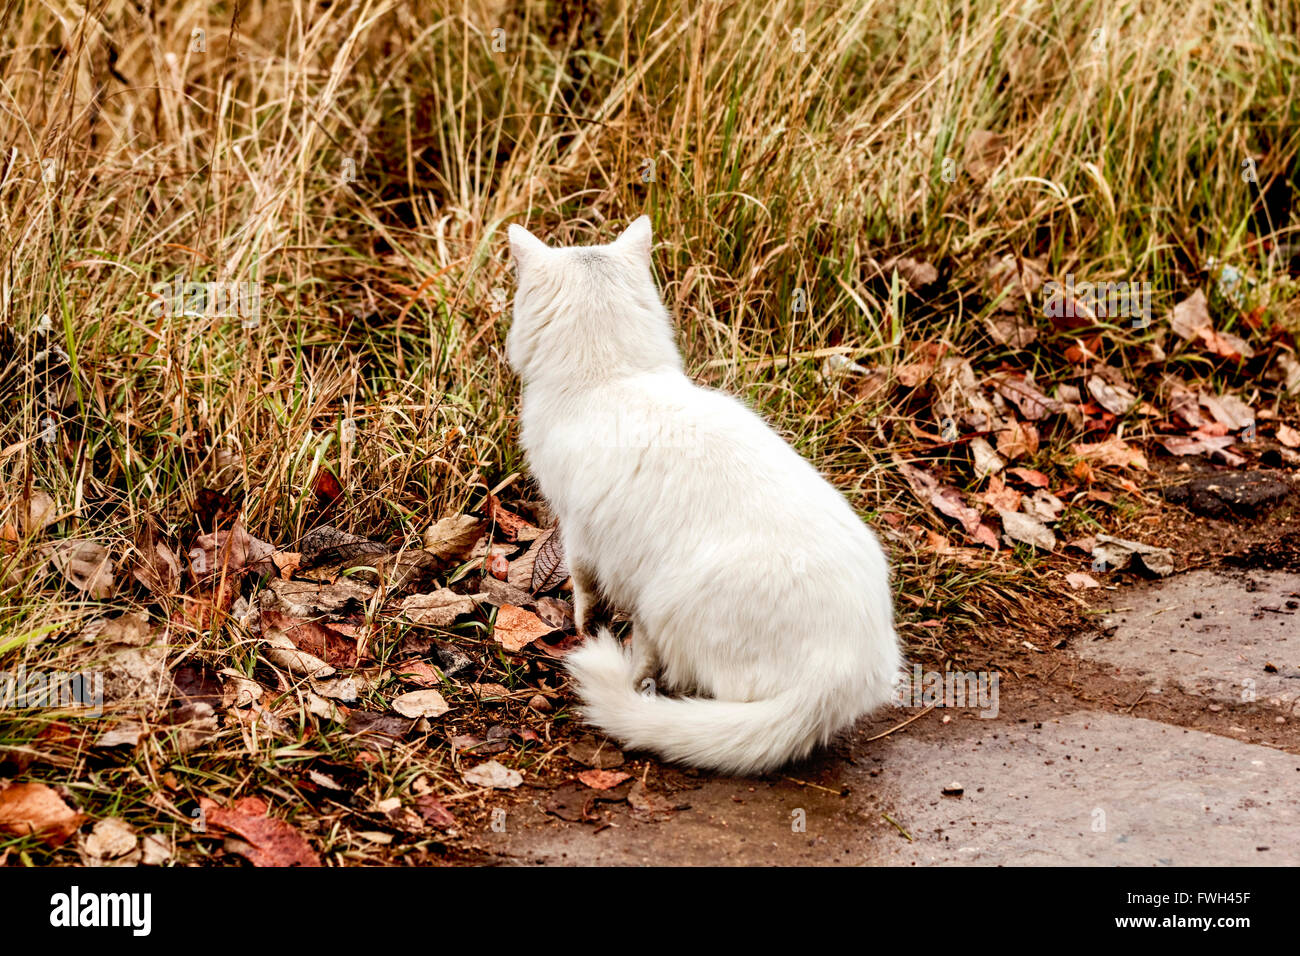 Big white cat hunting in autumn grass Stock Photo